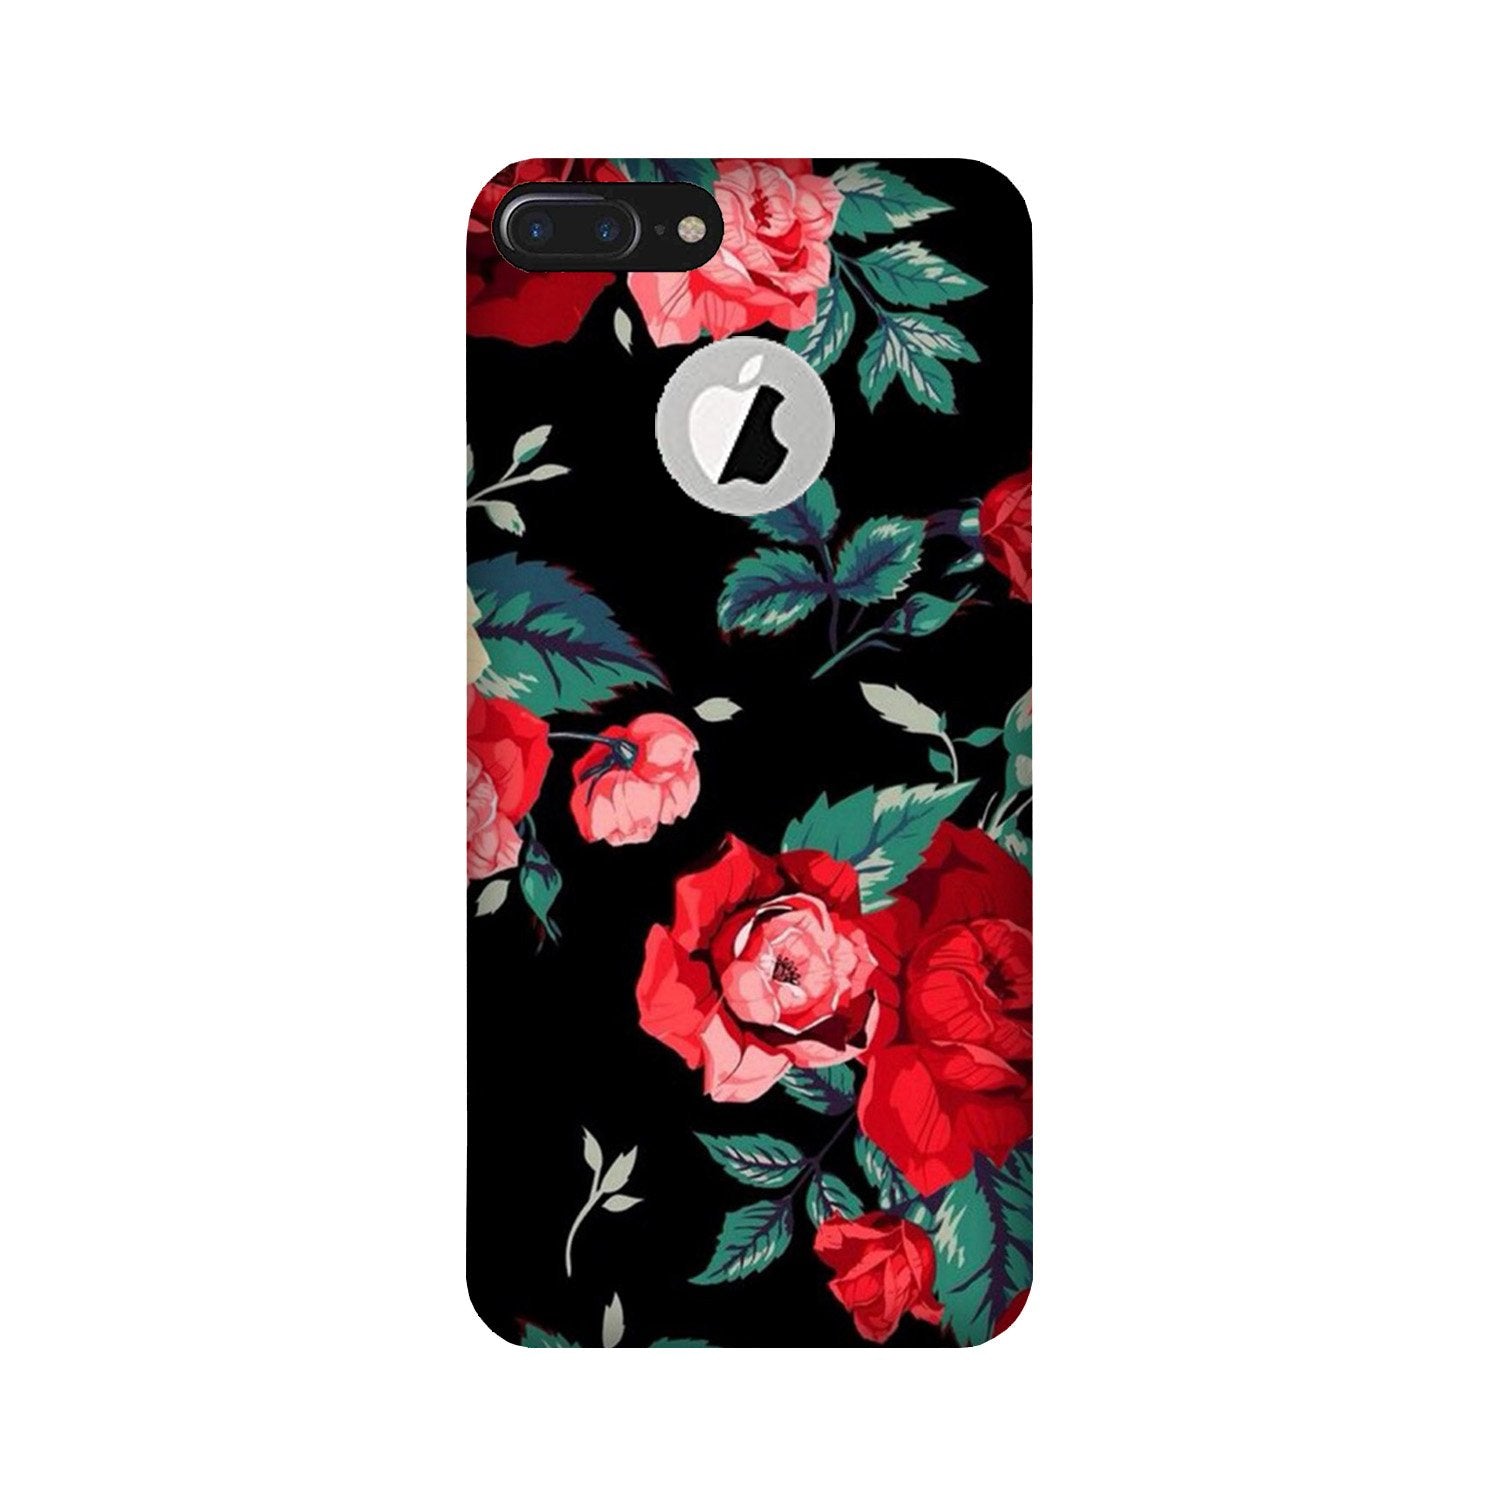 Red Rose2 Case for iPhone 7 Plus logo cut